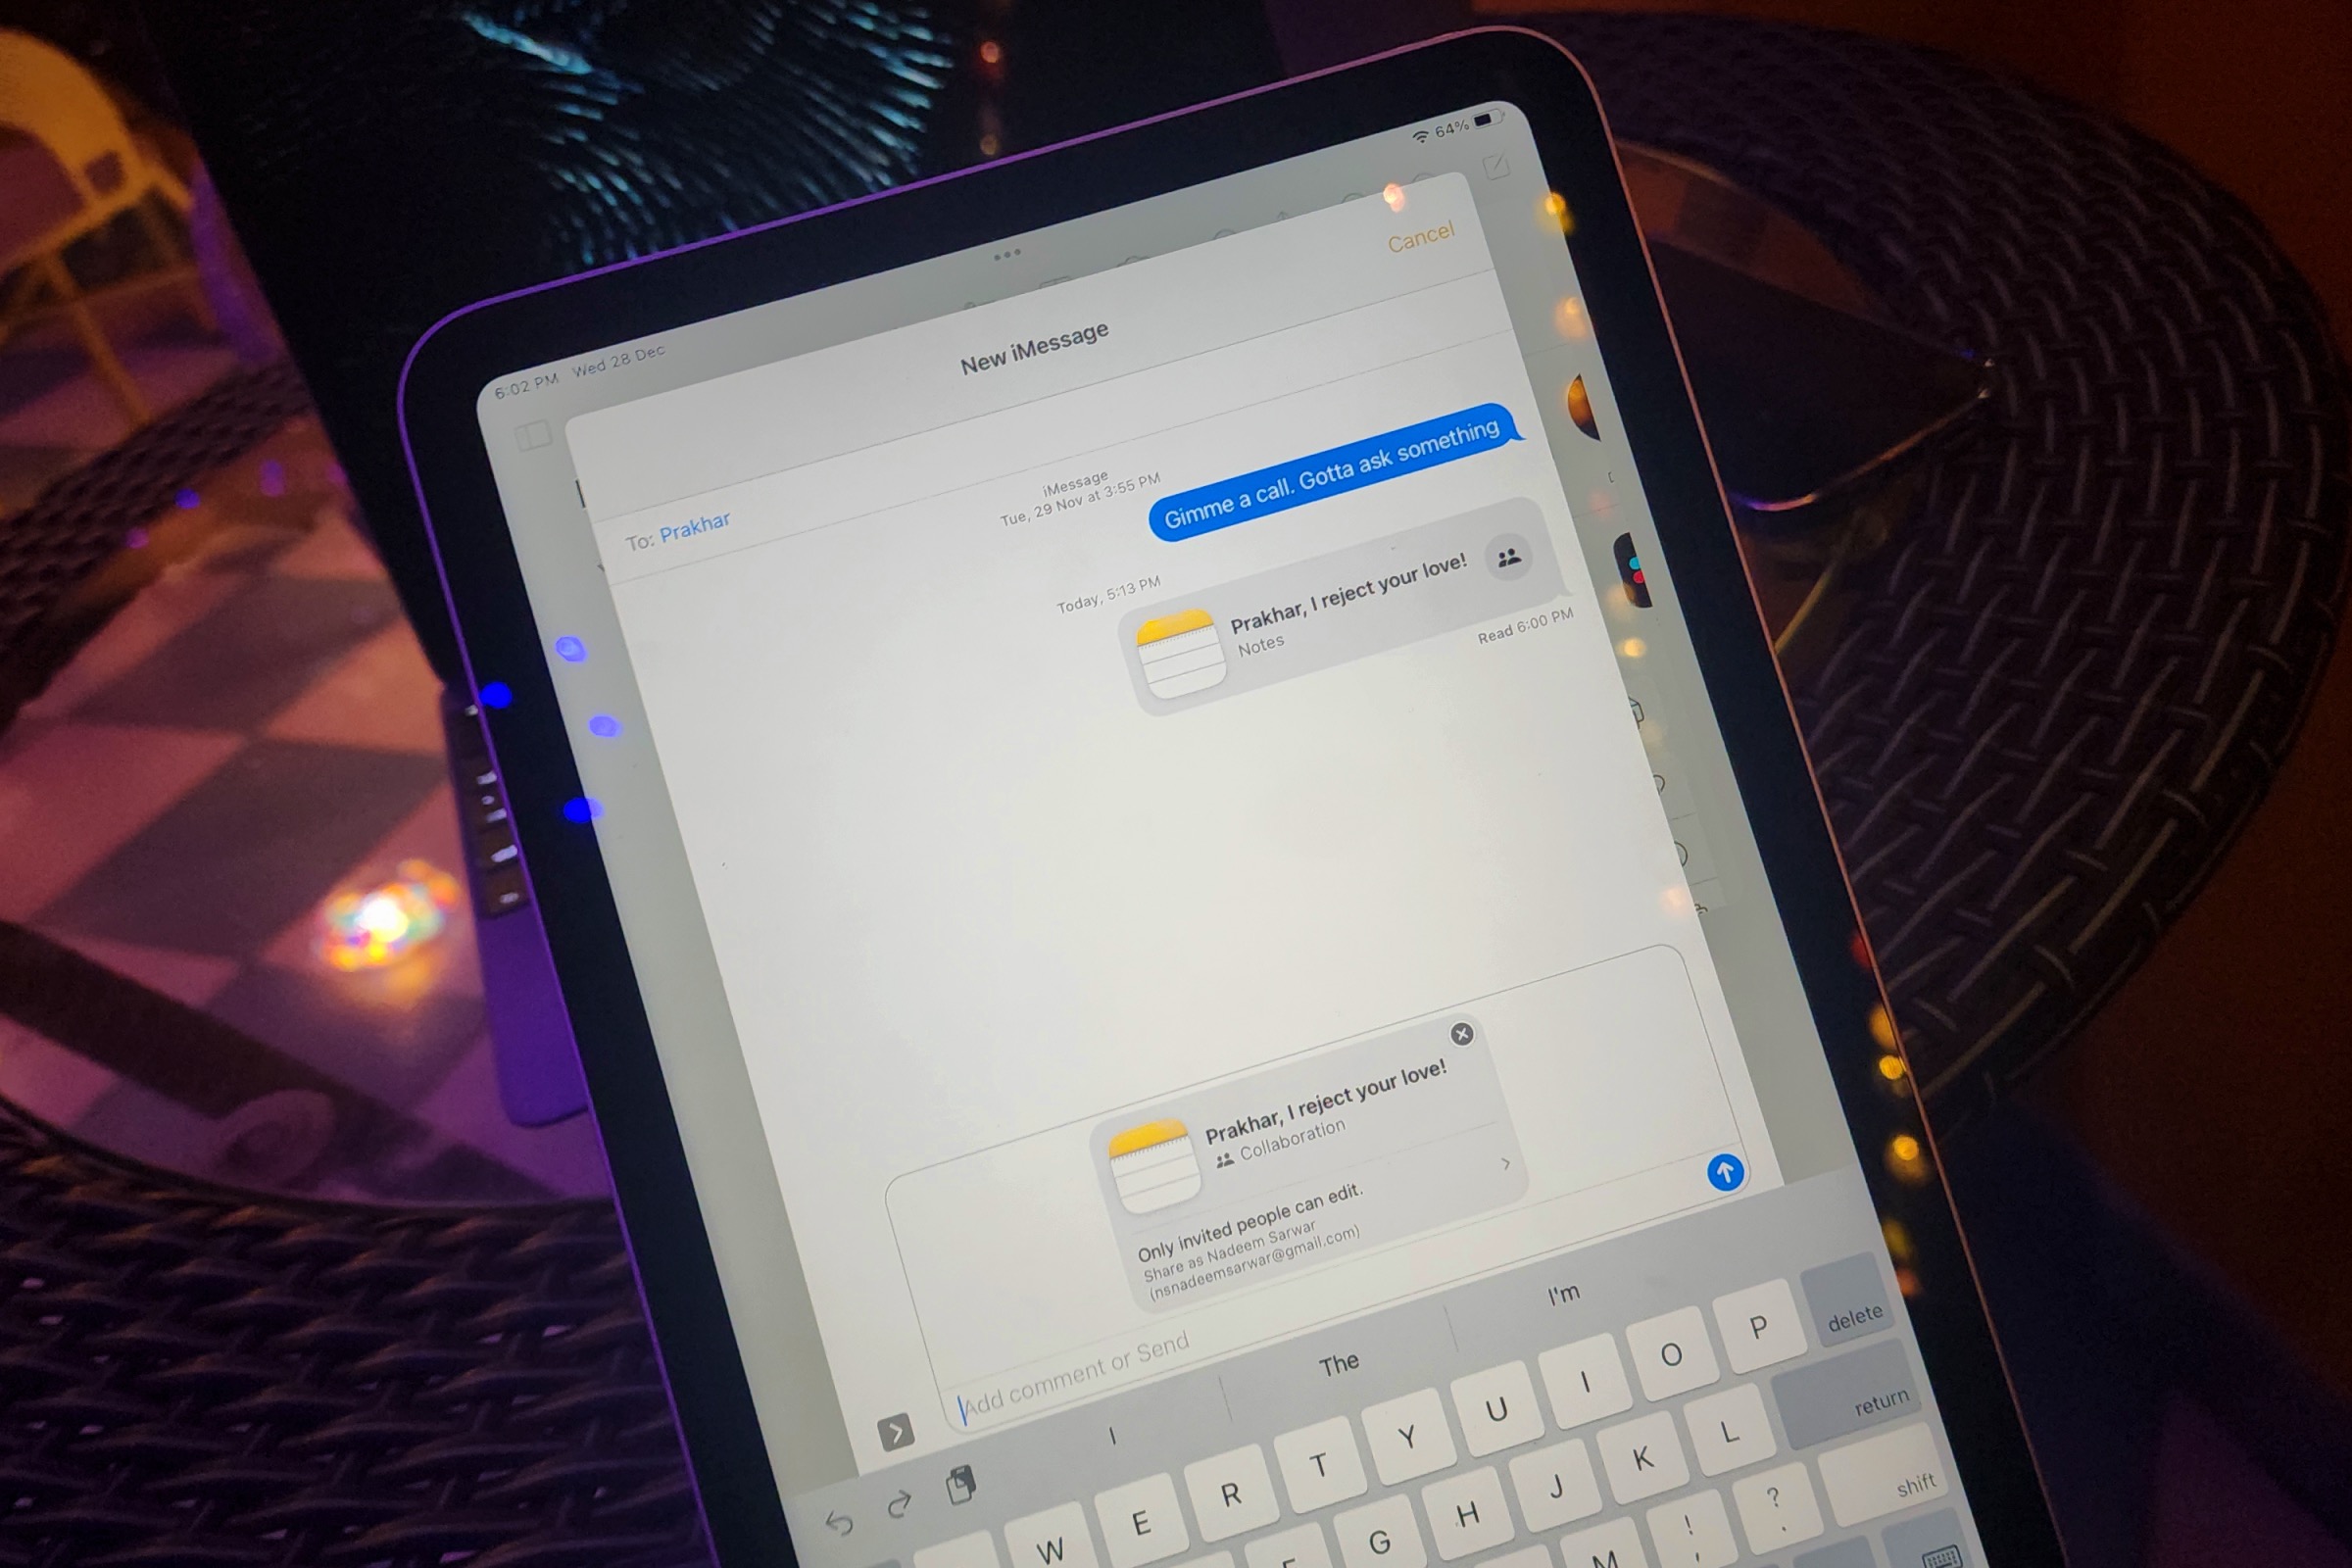 iMessage prompt for sharing a collaboration invite on iPad.